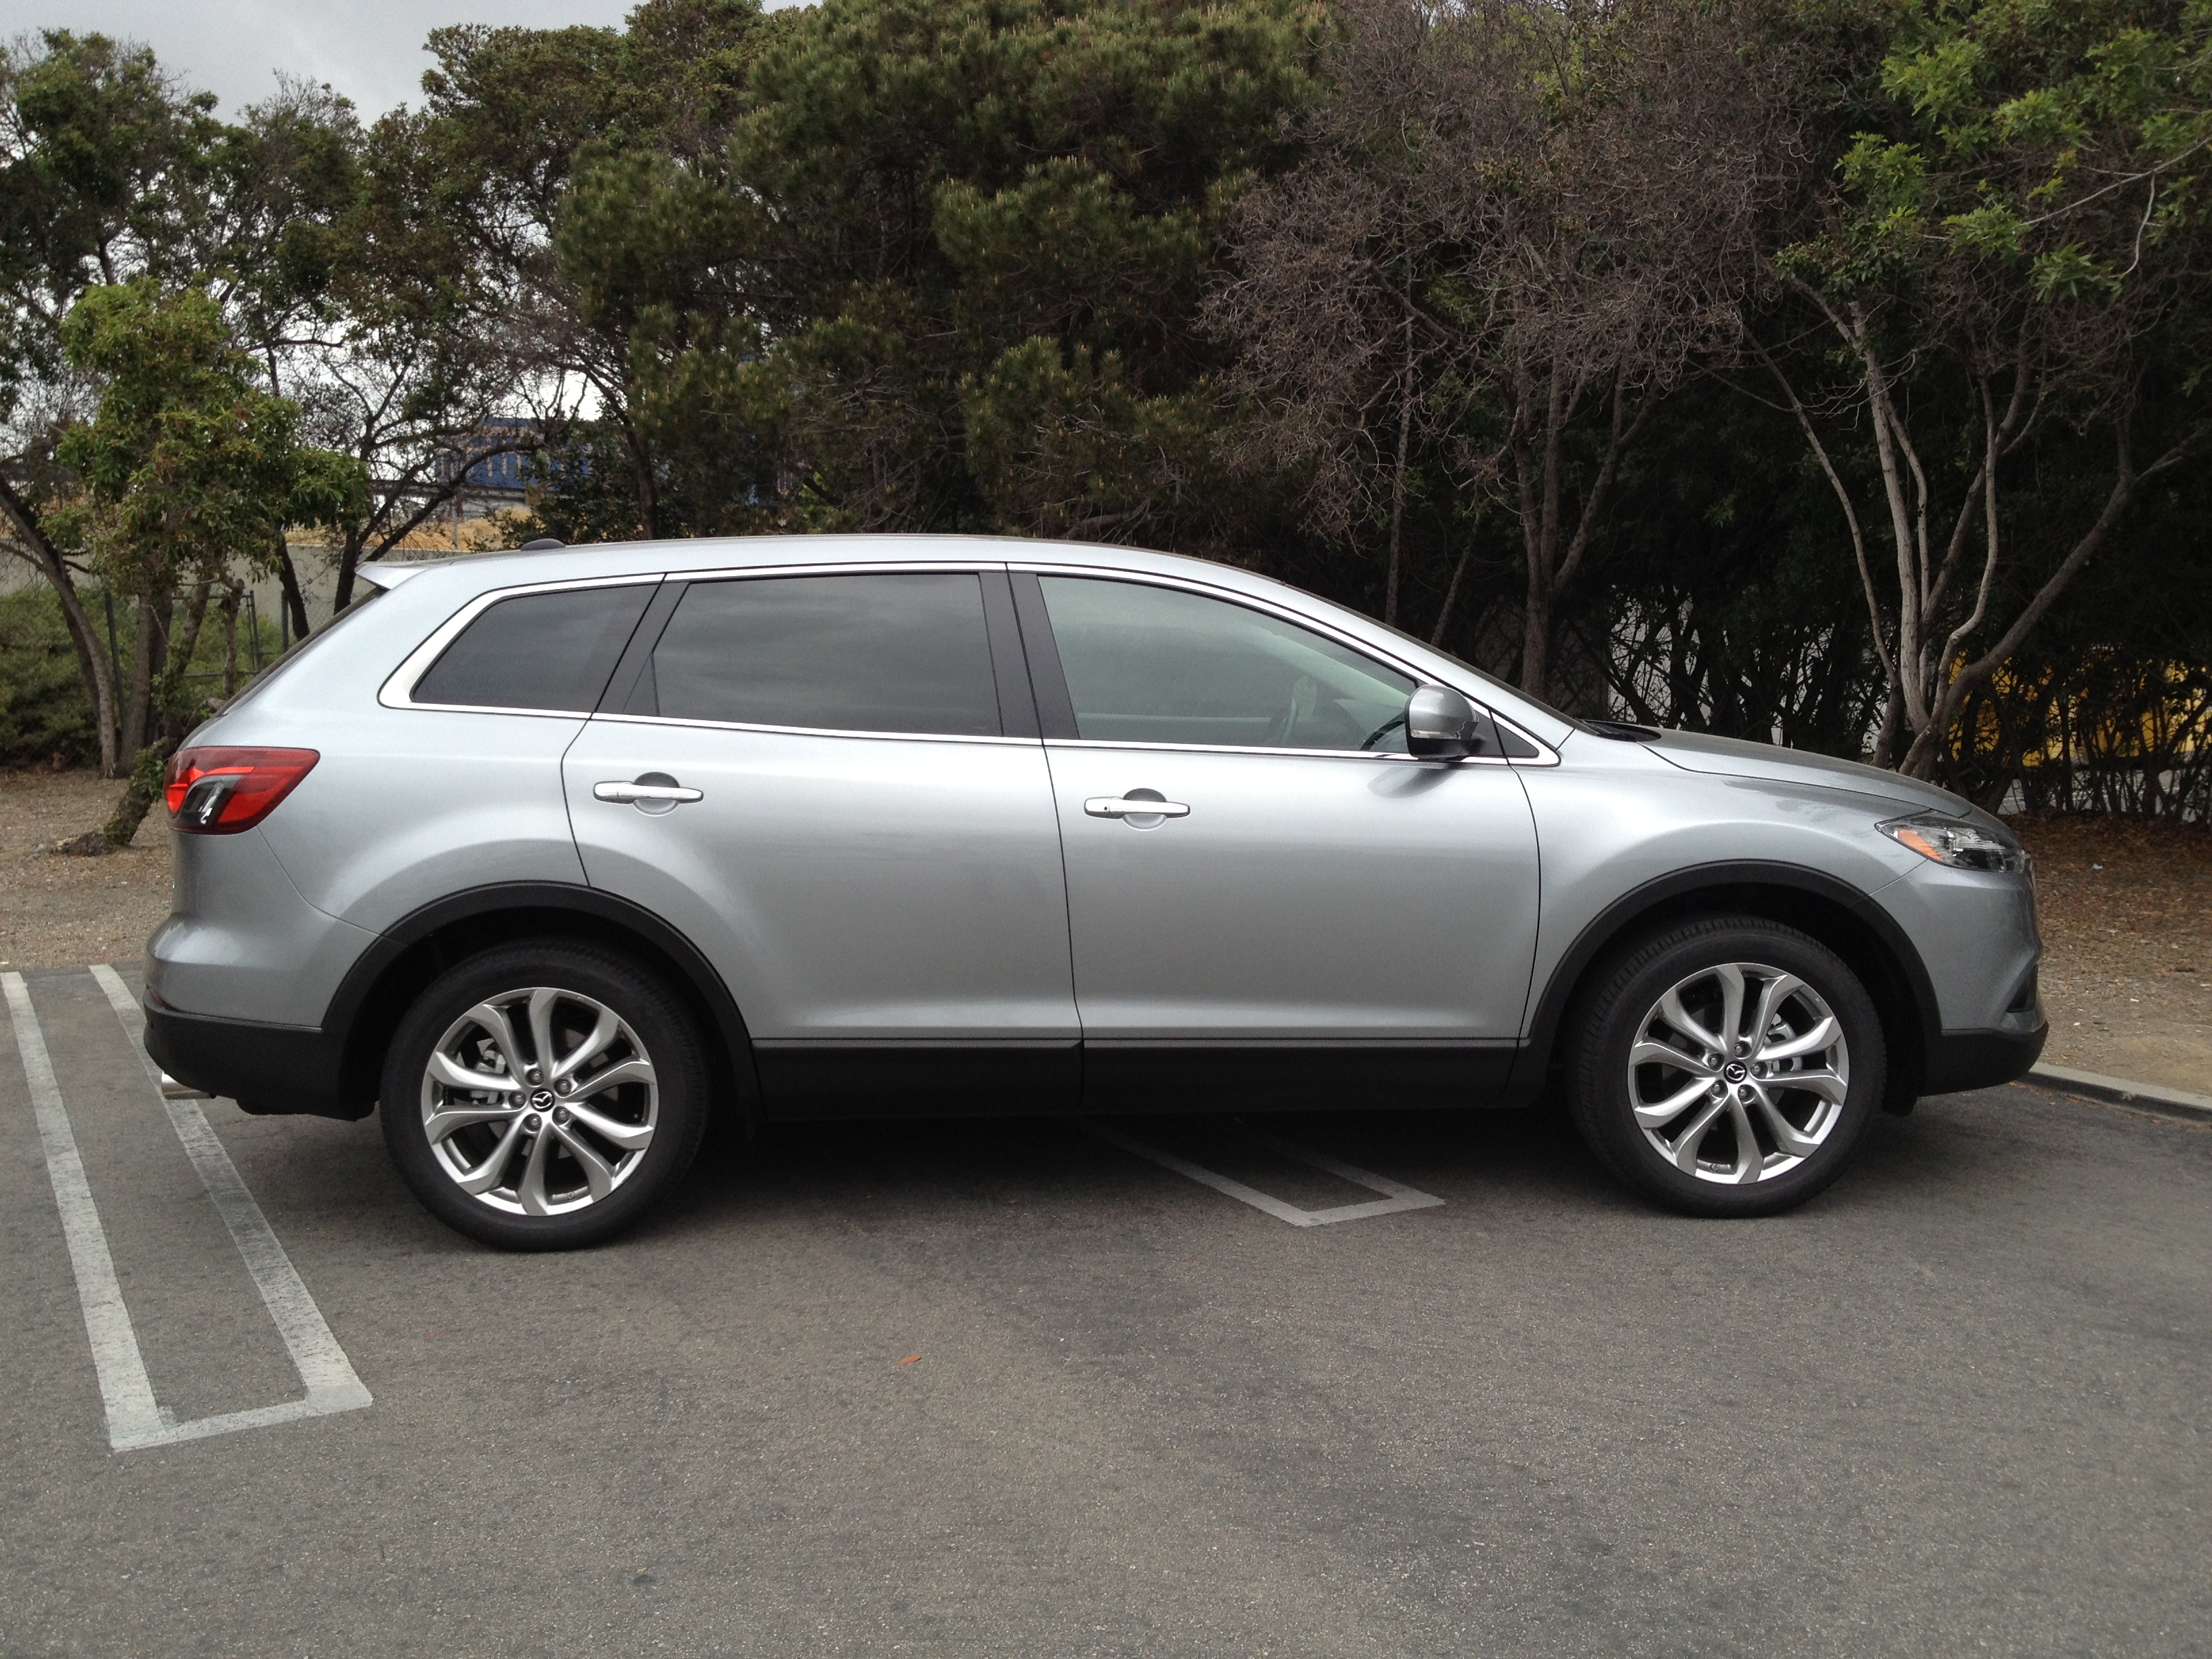 Take A Ride With Me In The Mazda CX-9!